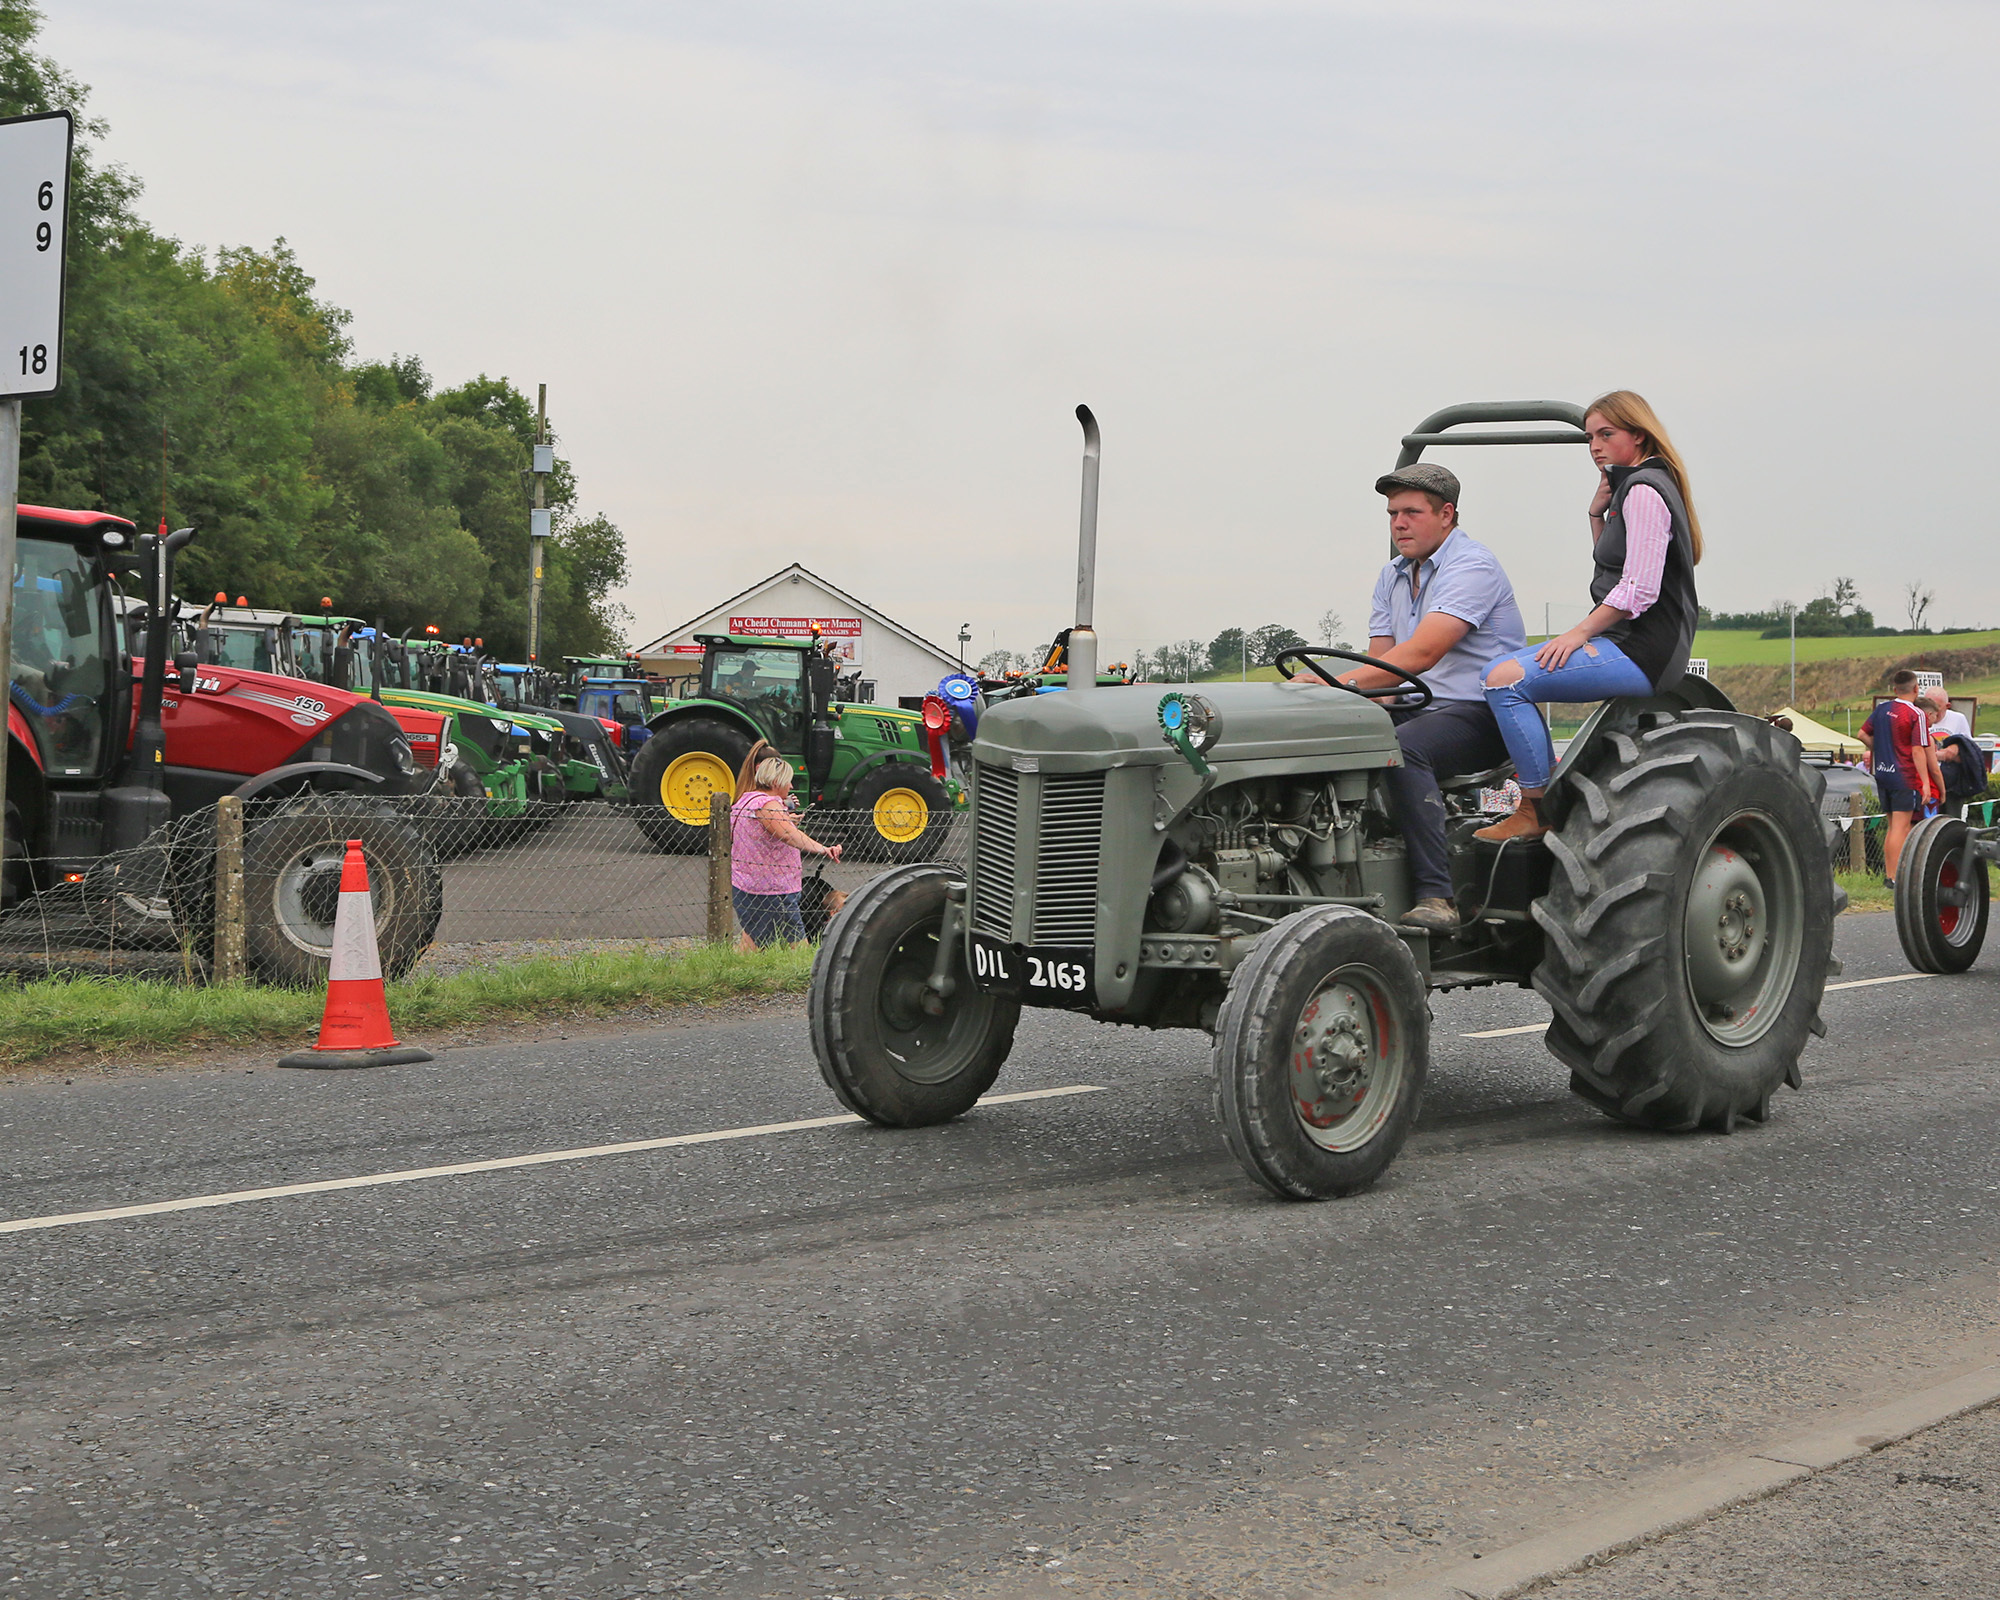 Gerald Clifford with his sister Rachel on the tractor run.